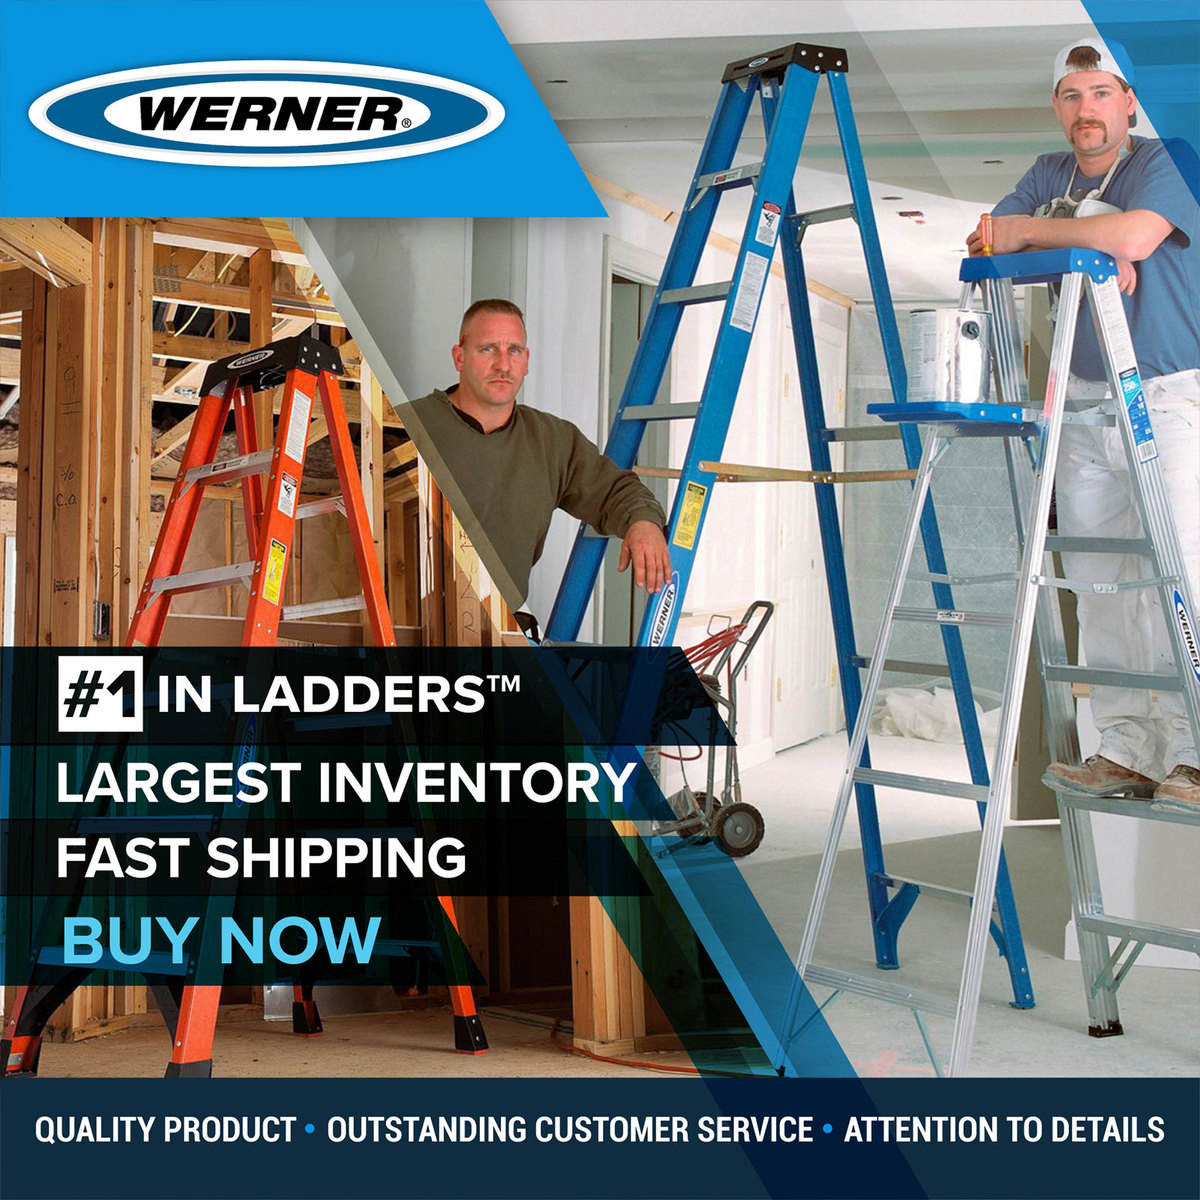 Werner No.1 in Ladders and Largest Inventory And Fast shipping.